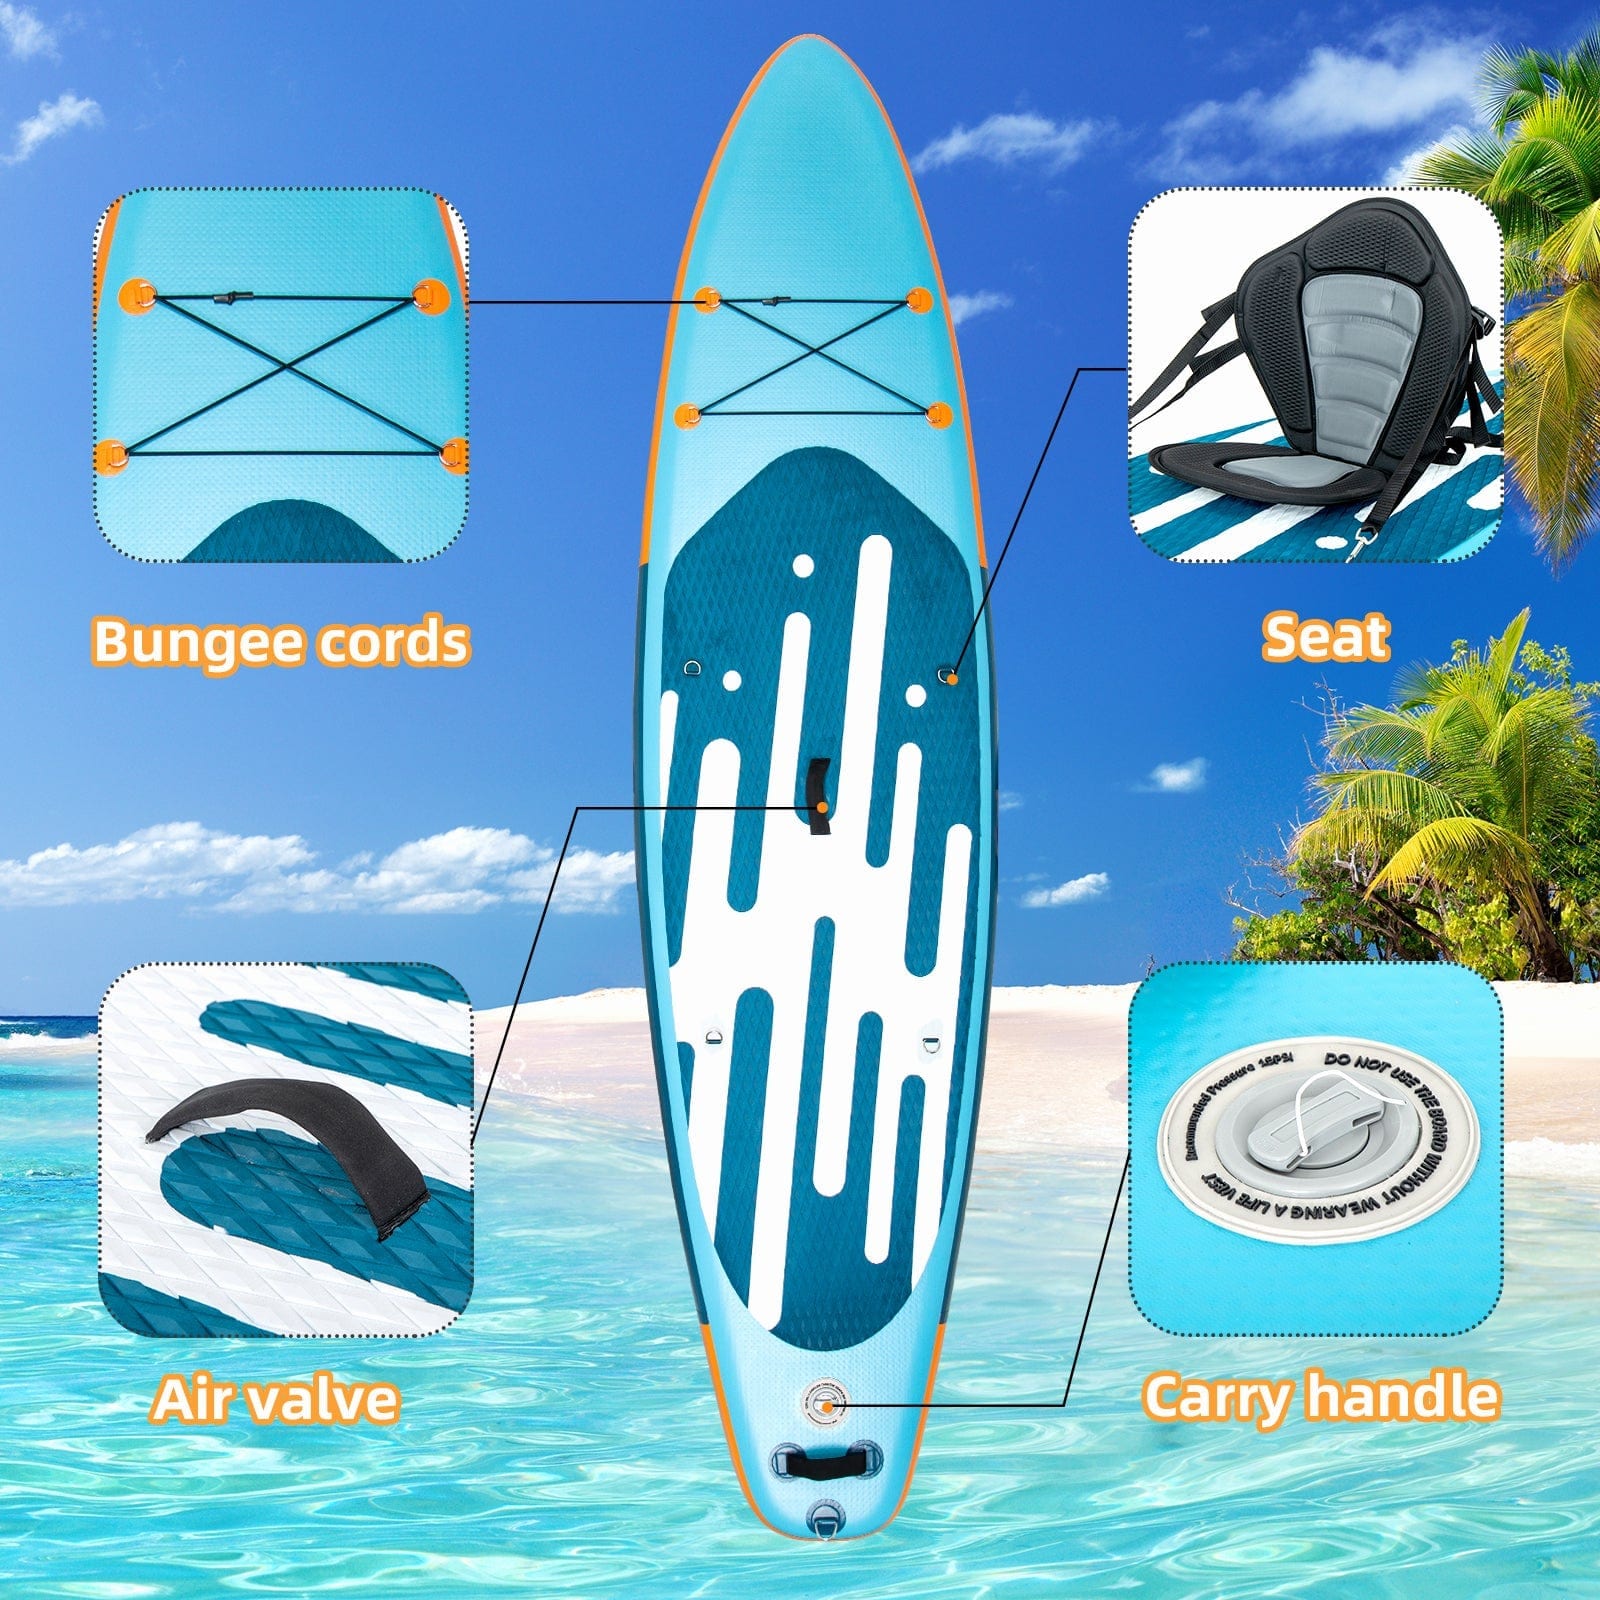 SOLIDEE Stand Up Paddle Board SOLIDEE 11 Ft Inflatable Stand Up Paddle Board with Kayak Seat Backpack,Blue